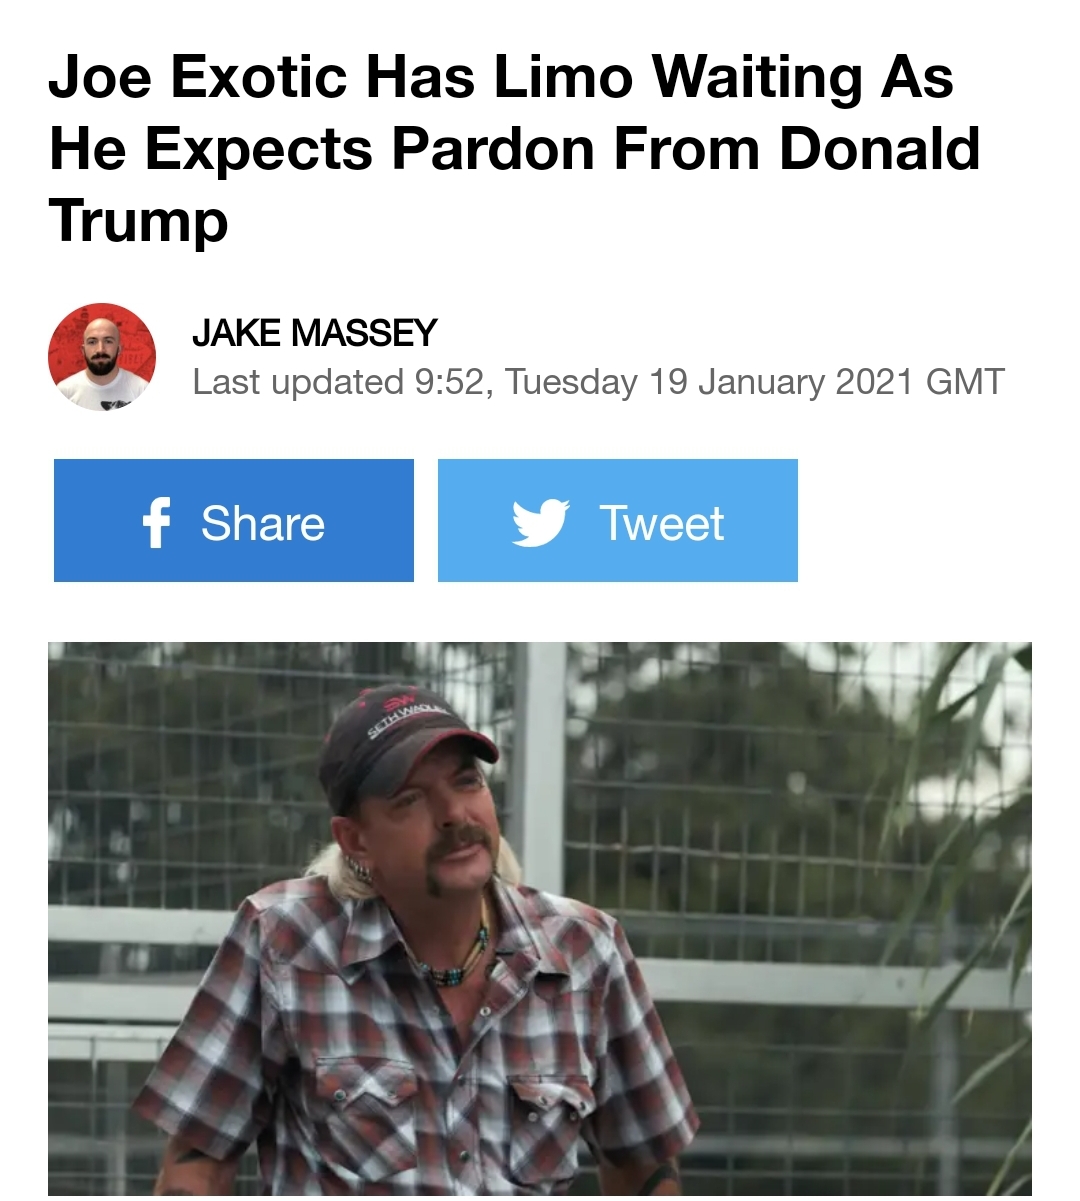 media - Joe Exotic Has Limo Waiting As He Expects Pardon From Donald Trump Jake Massey Last updated , Tuesday Gmt f Tweet